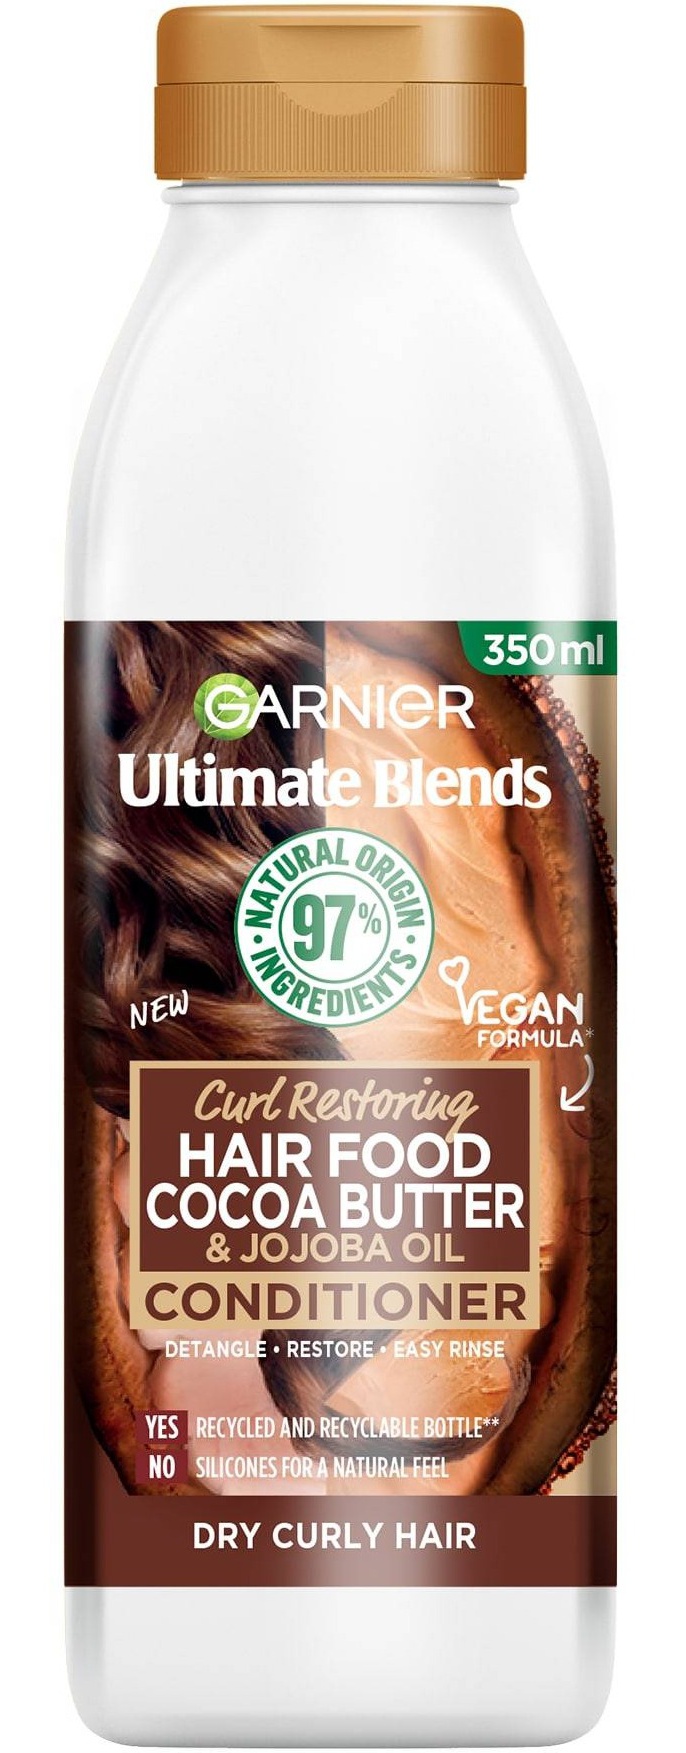 Garnier Ultimate Blends Hair Food Cocoa Butter Conditioner